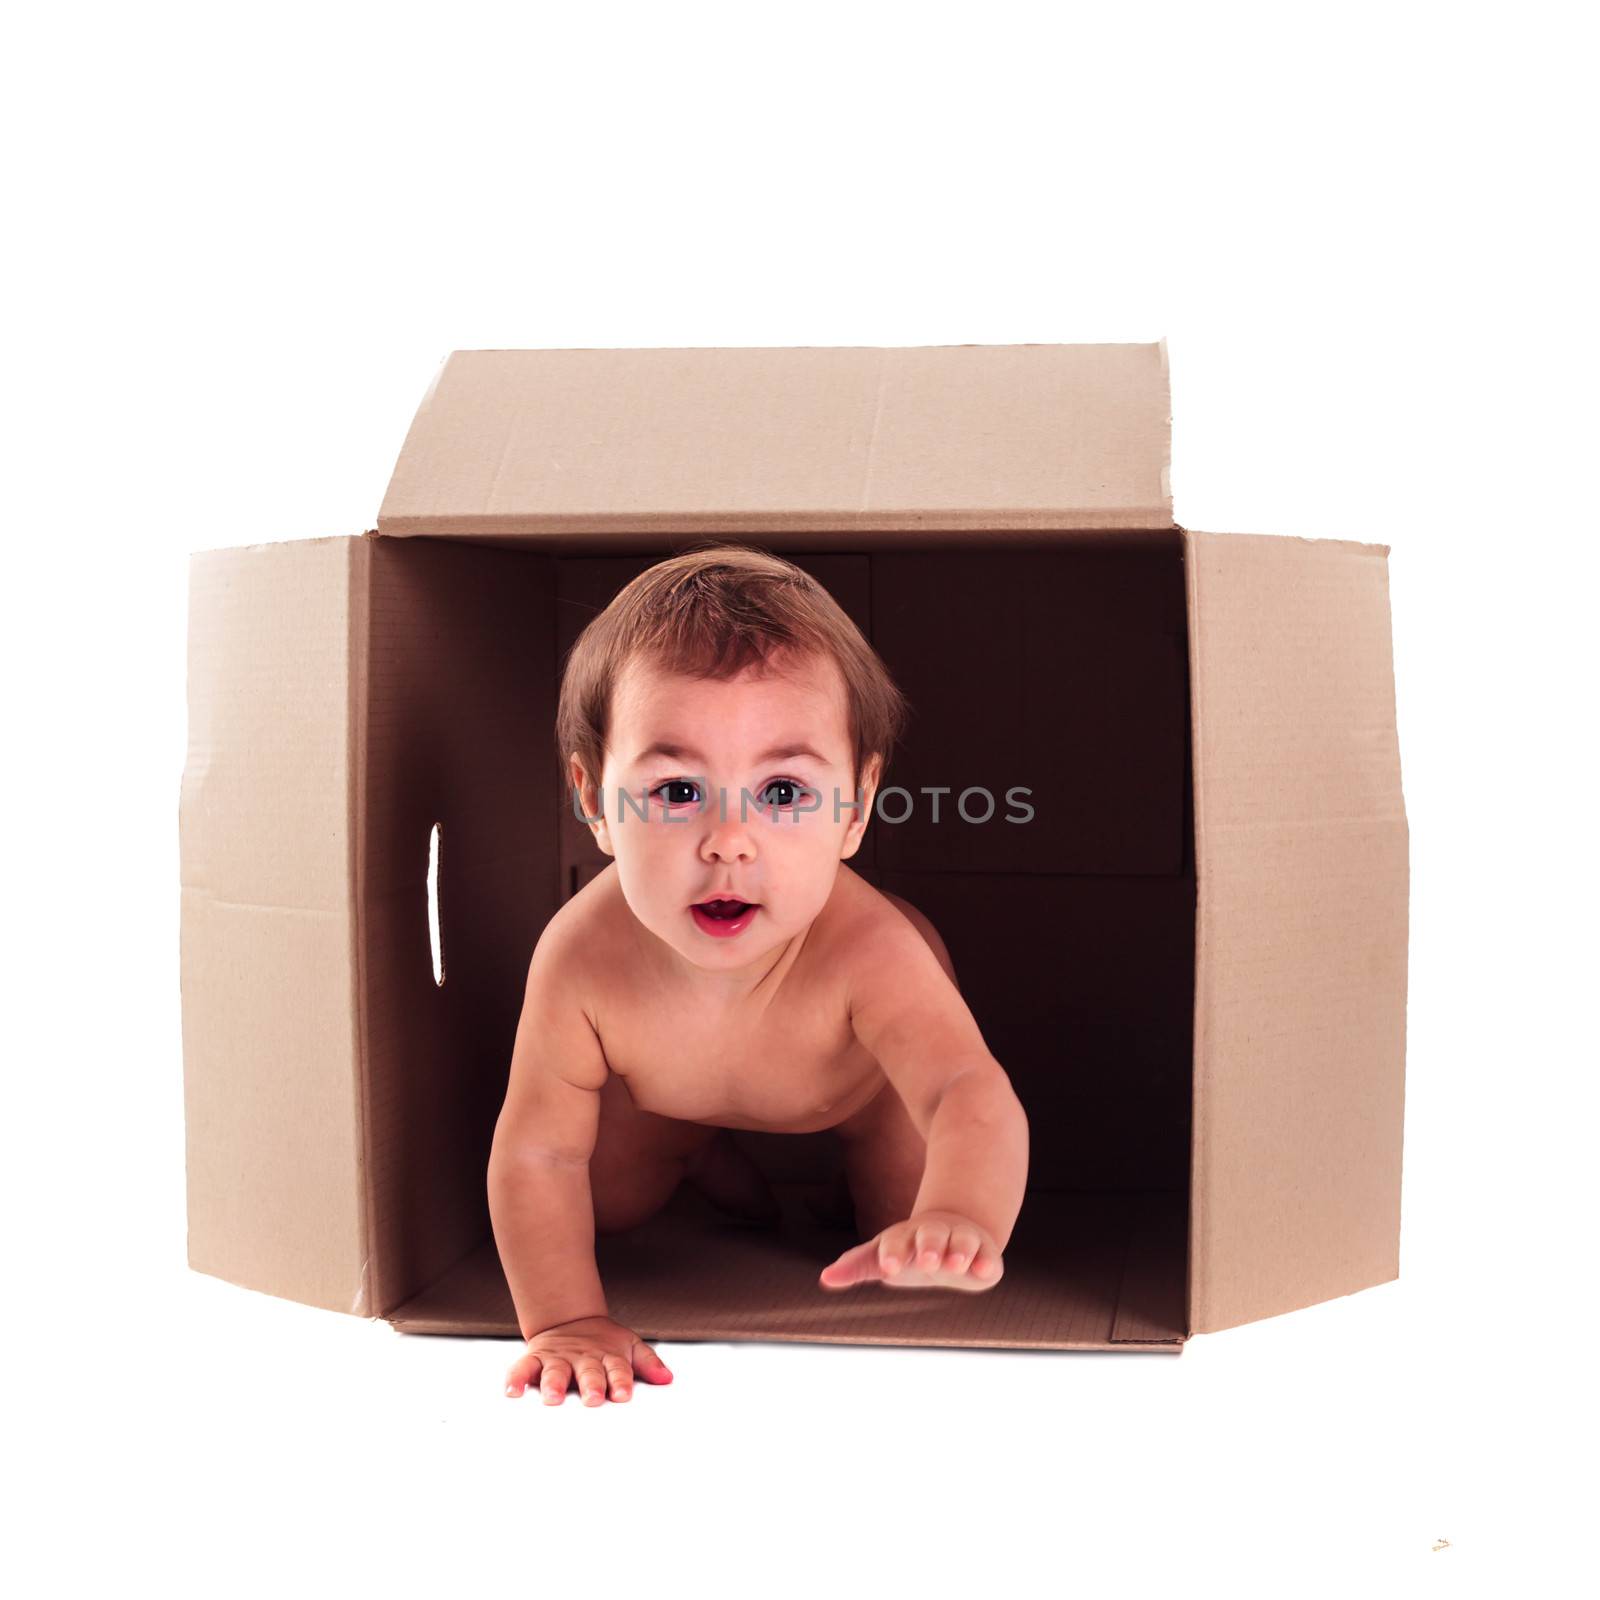 A small child (baby) crawls out of the box isolated